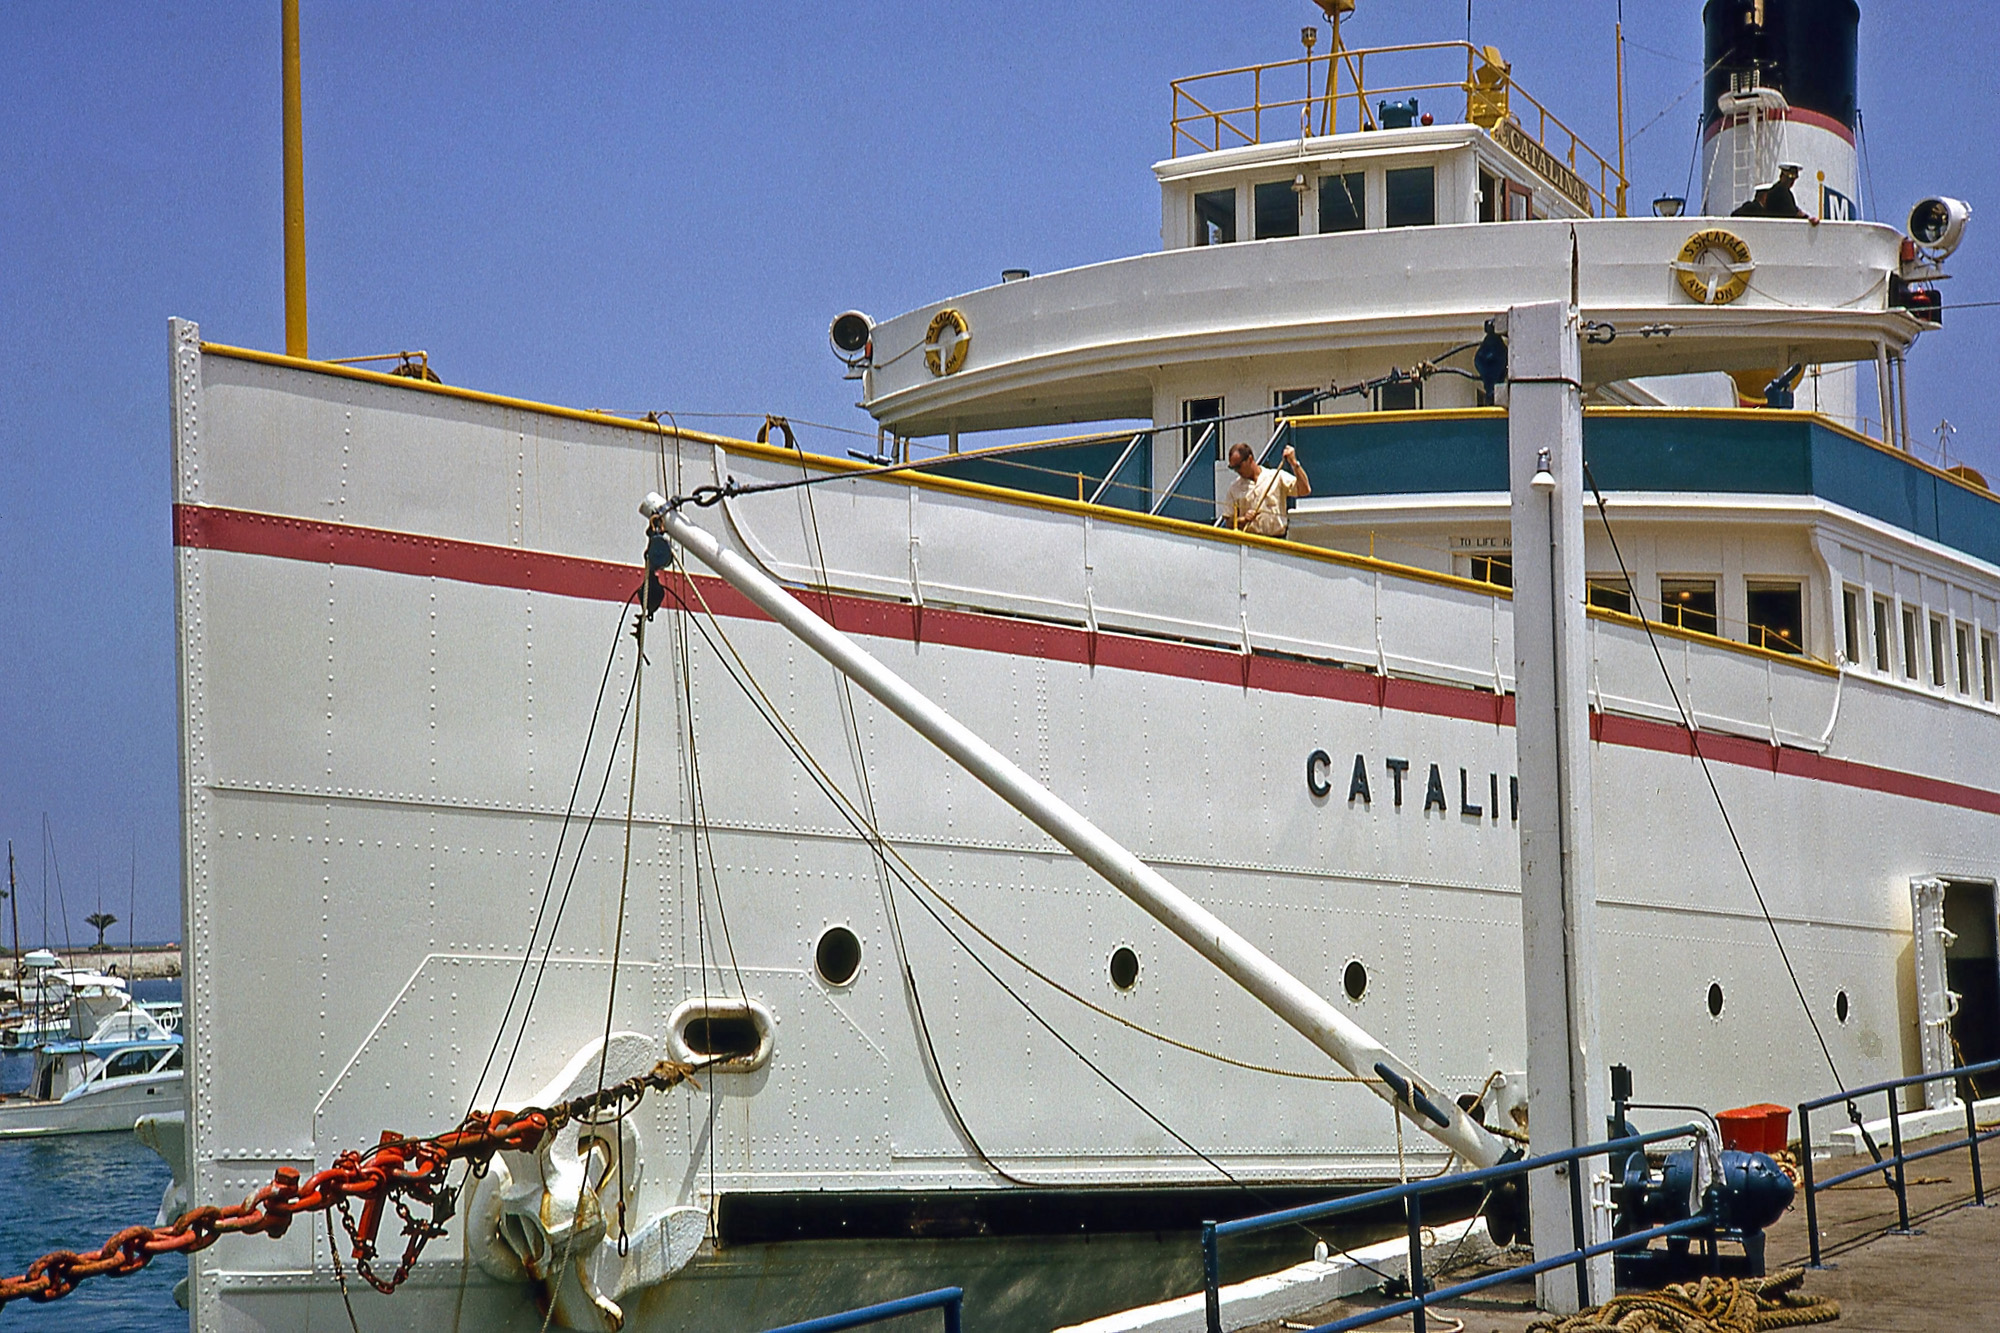 The late, lamented Great White Steamer, the SS Catalina in Avalon Harbor. Built in 1924, it was the only way to travel to Catalina Island with class. Its fate was to lie buried in the mud off of Ensenada Harbor, later to be broken up for scrap. Kodachrome slide taken by my dad in 1965. View full size.